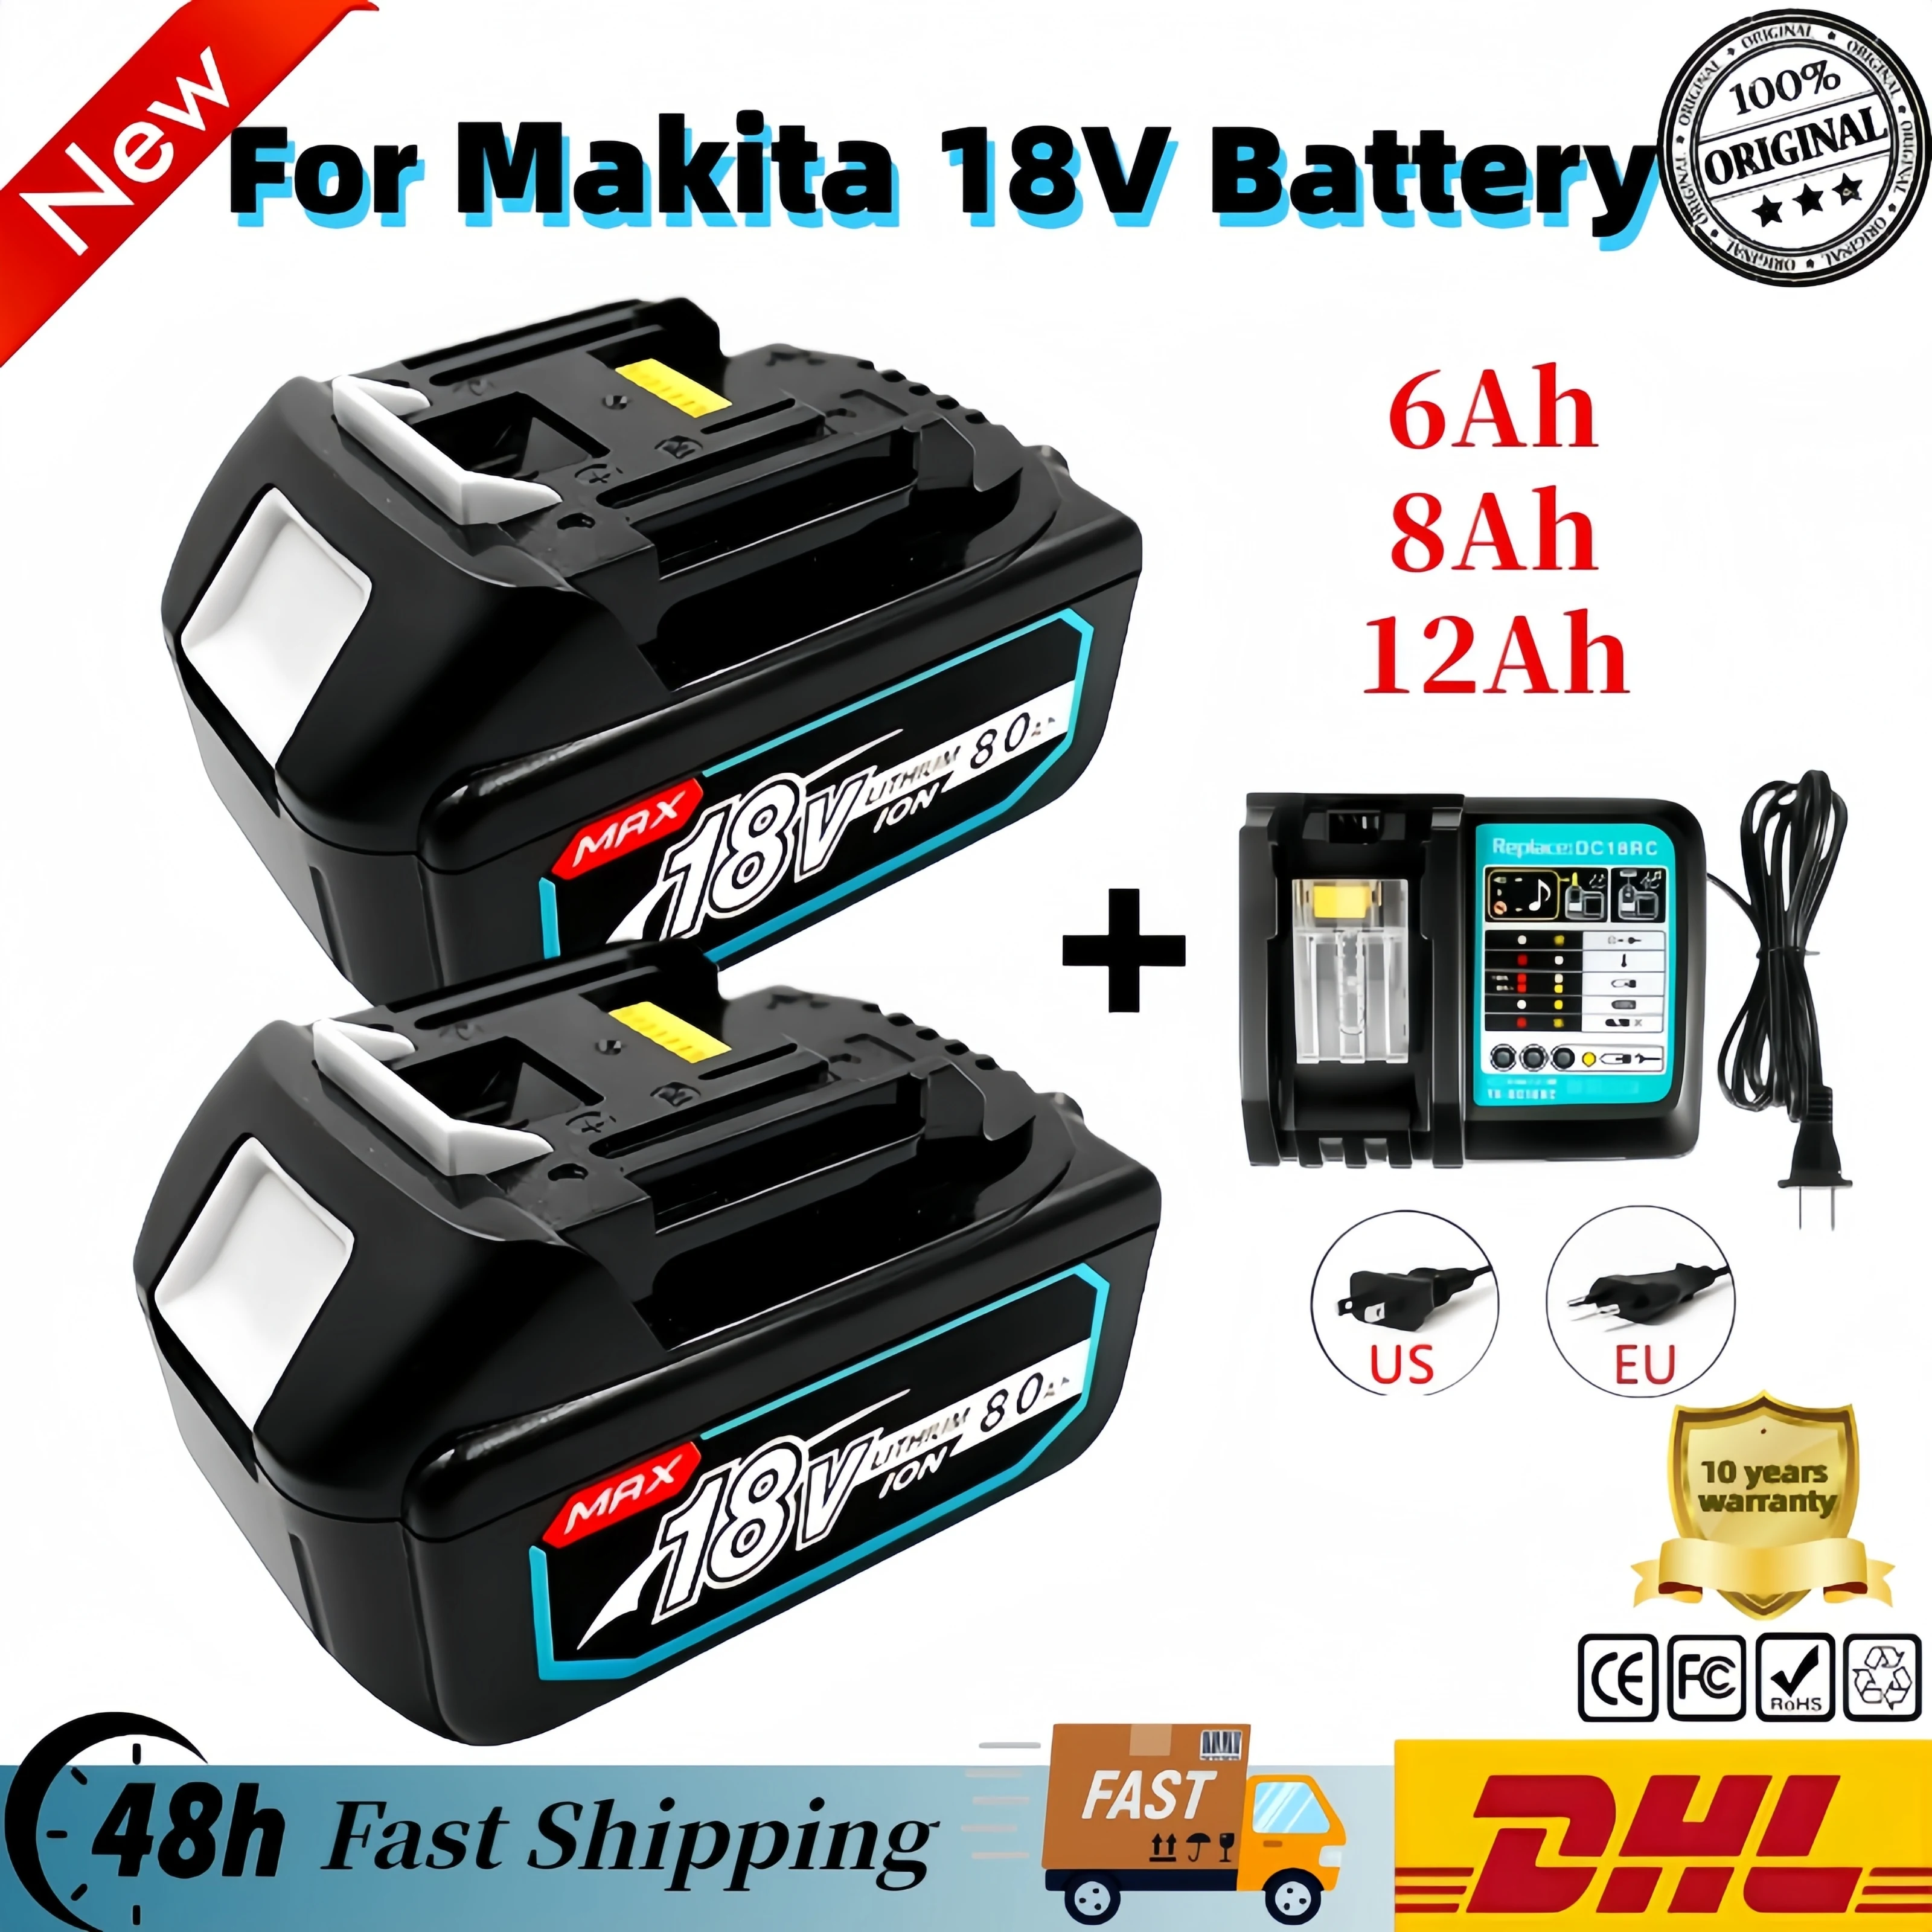 

For Makita 18V 6.0 8.0Ah Rechargeable Battery For Makita Power Tools with LED Li-ion Replacement LXT BL1860 1850 volt 8000mAh